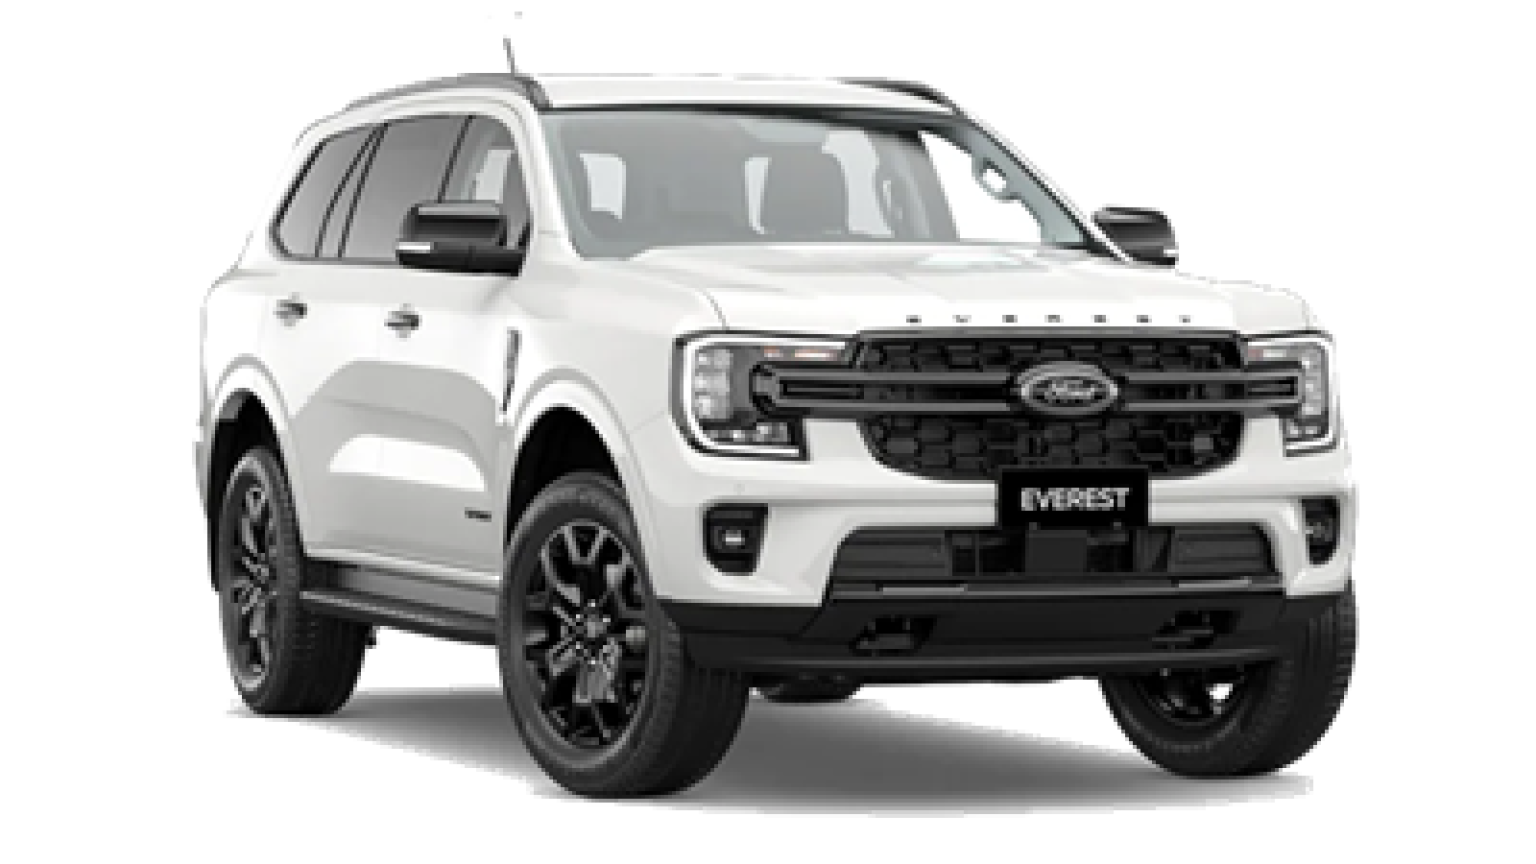 22b00d39/ford everest png